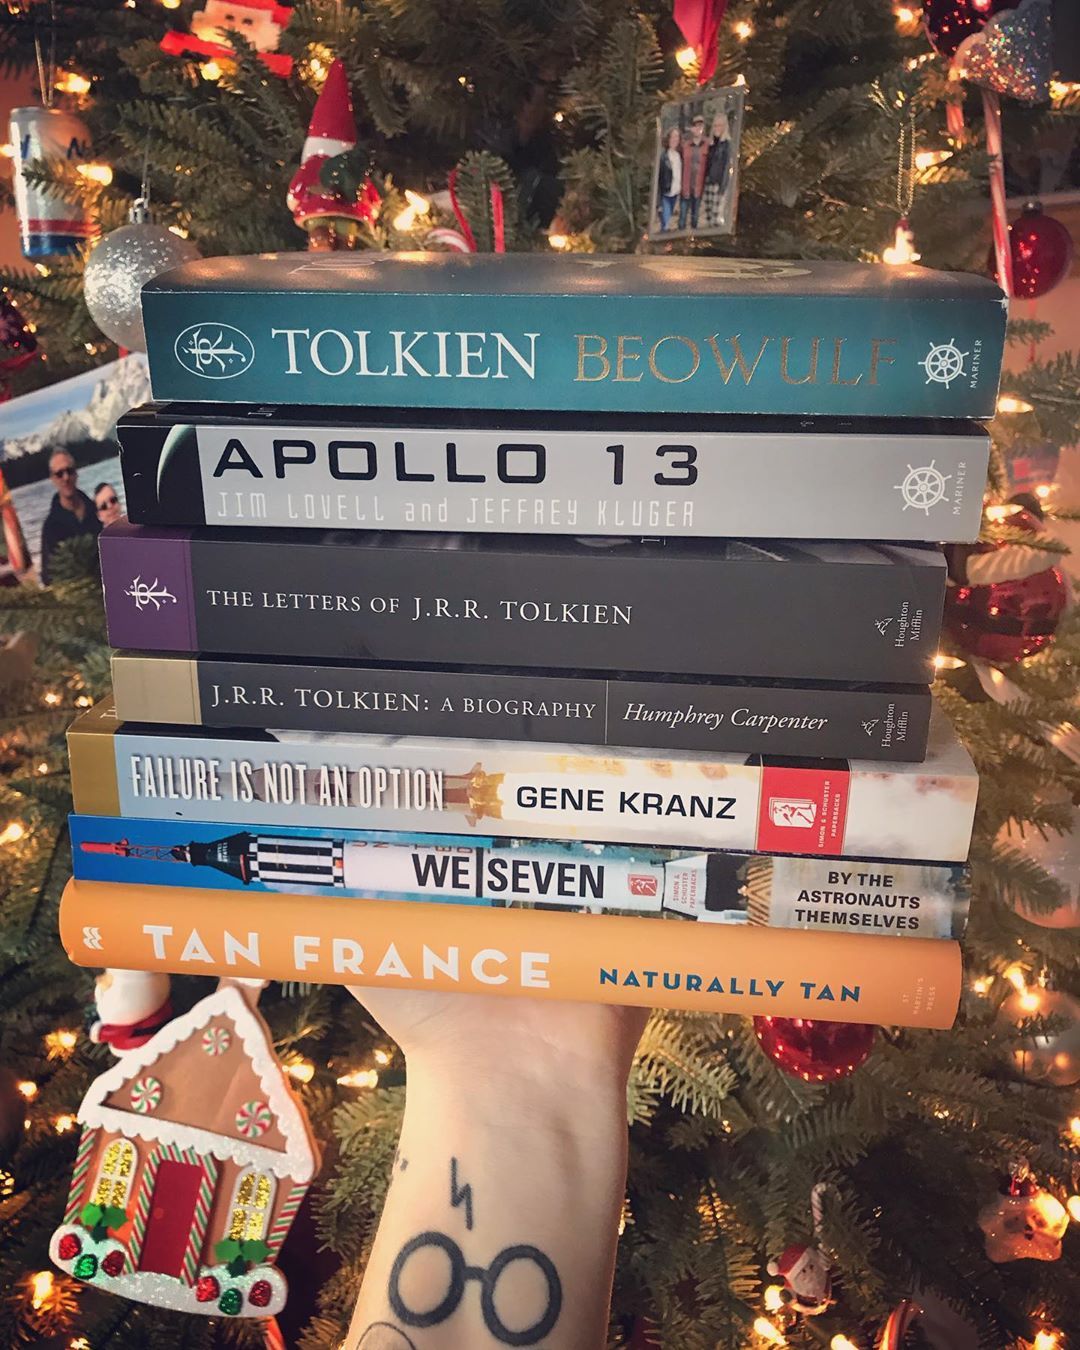 Merry Christmas! 🎄🤶🏻❄️ Santa brought me a bunch of space and Tolkien books, and I honestly couldn’t be happier. 📚 . #maryreads #amreading #reading #readersofinstagram #books #bookish #booklover #bookreview #bookstack #bookstagram #bookworm...